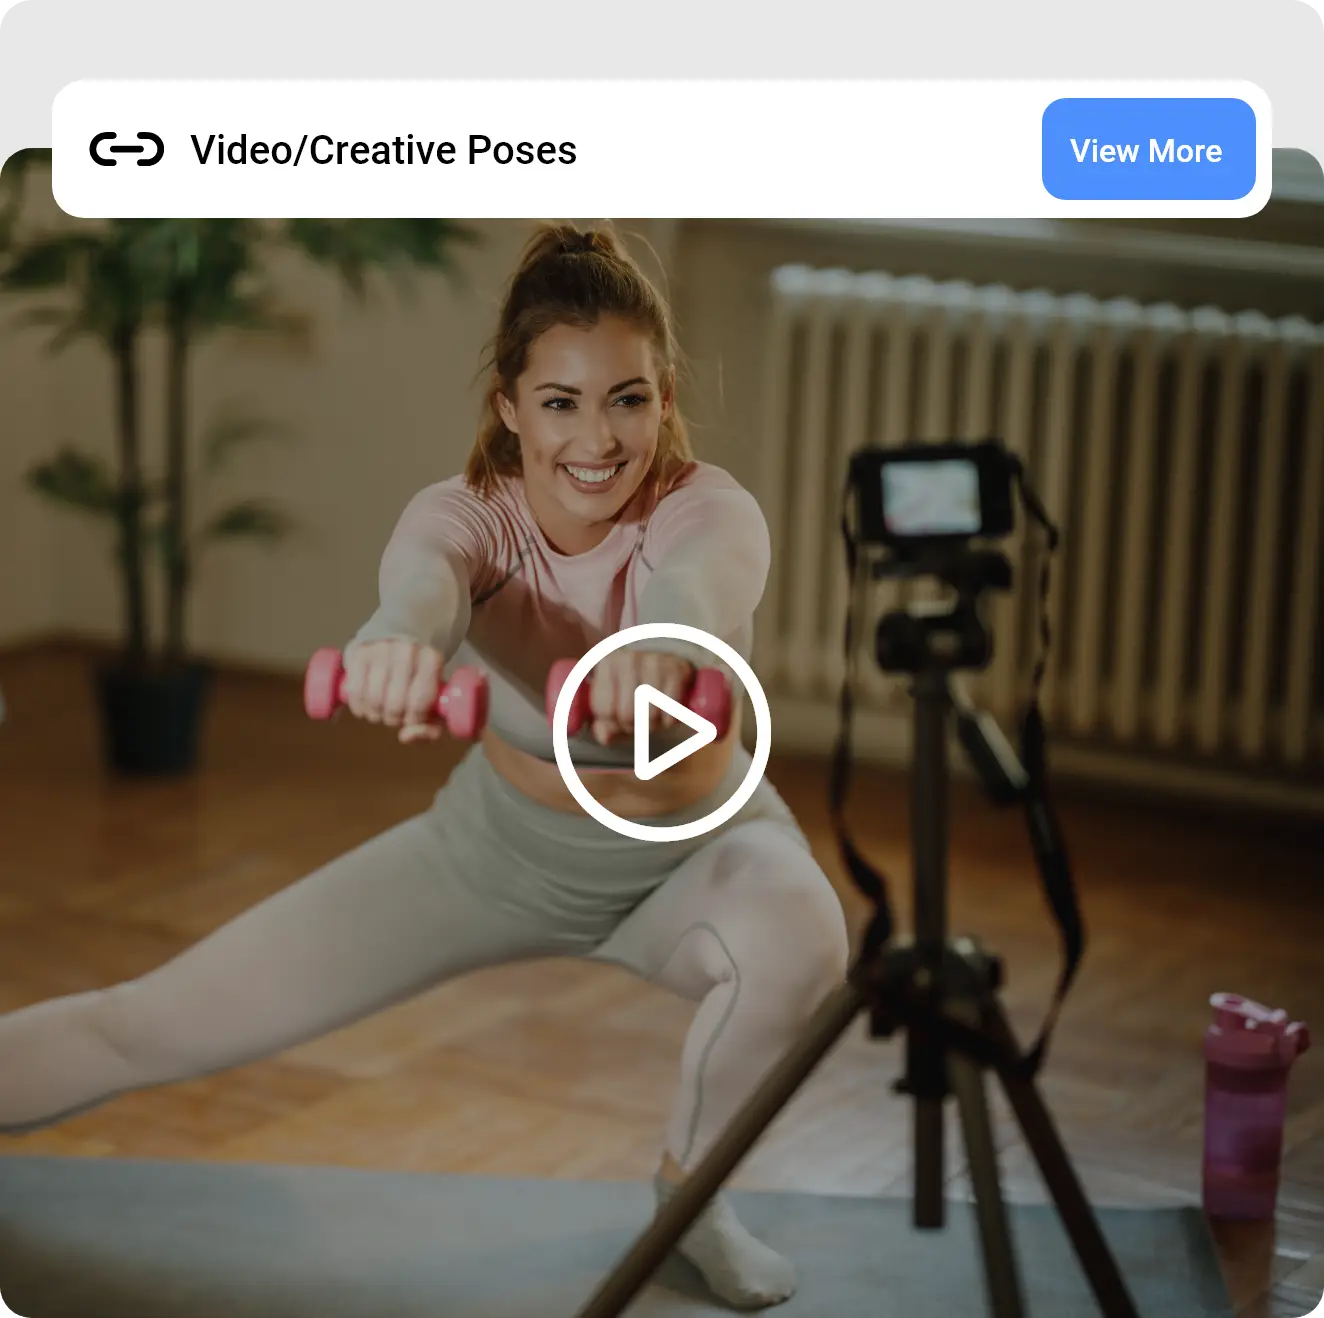 Yoga studio software's video-on-demand feature to get more conversions